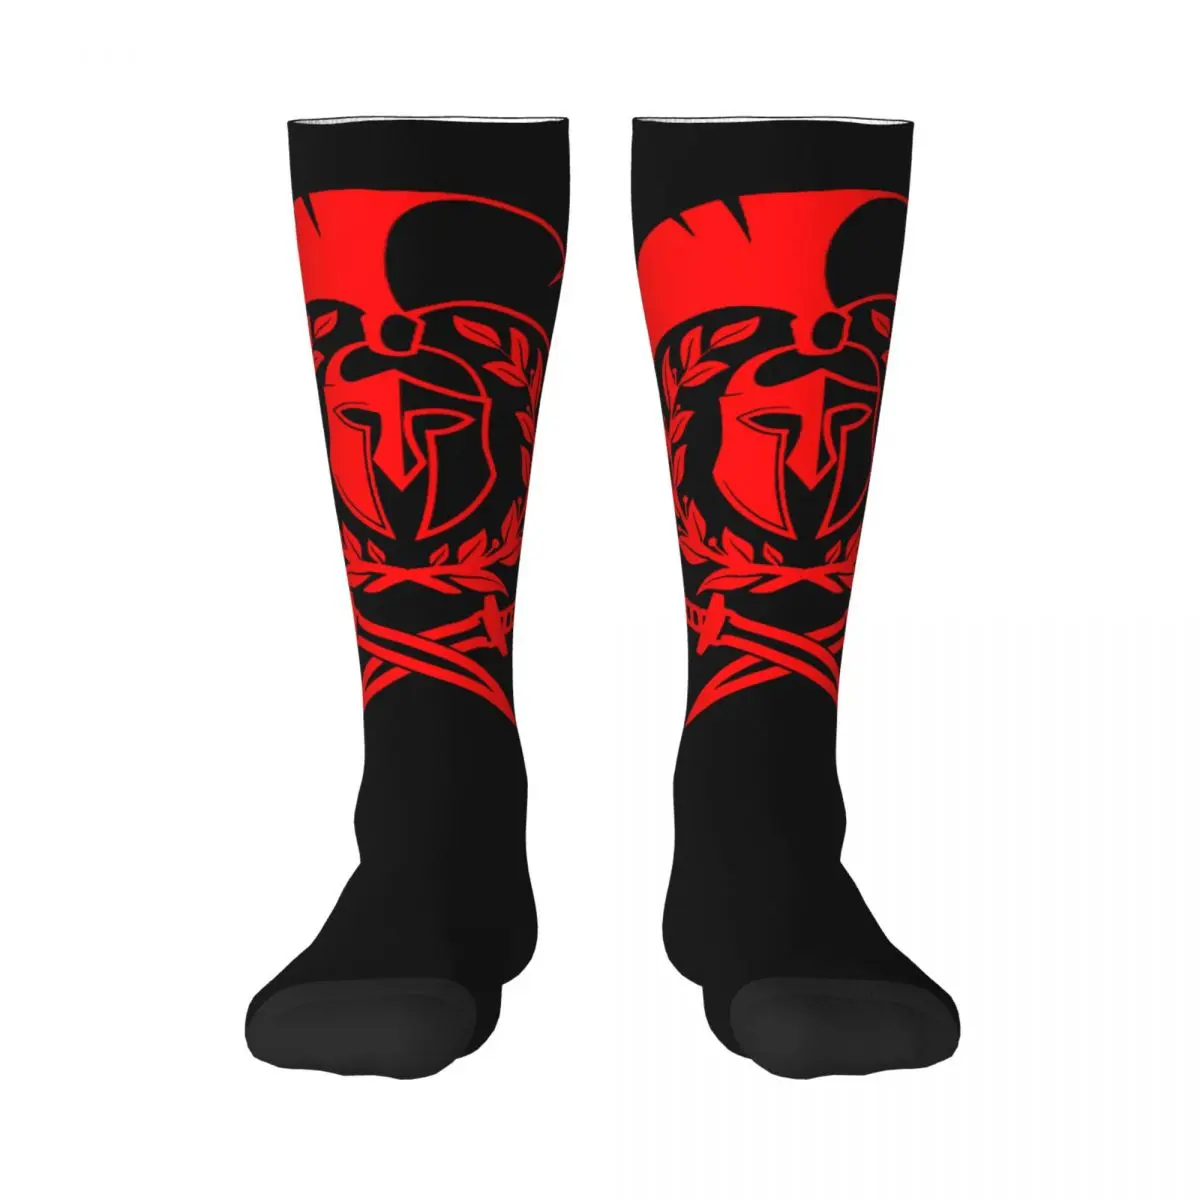 

Adult Stockings Spartan Sparta Warrior Helmet 4 High elasticity Funny Novelty Graphic INS style Compression Socks